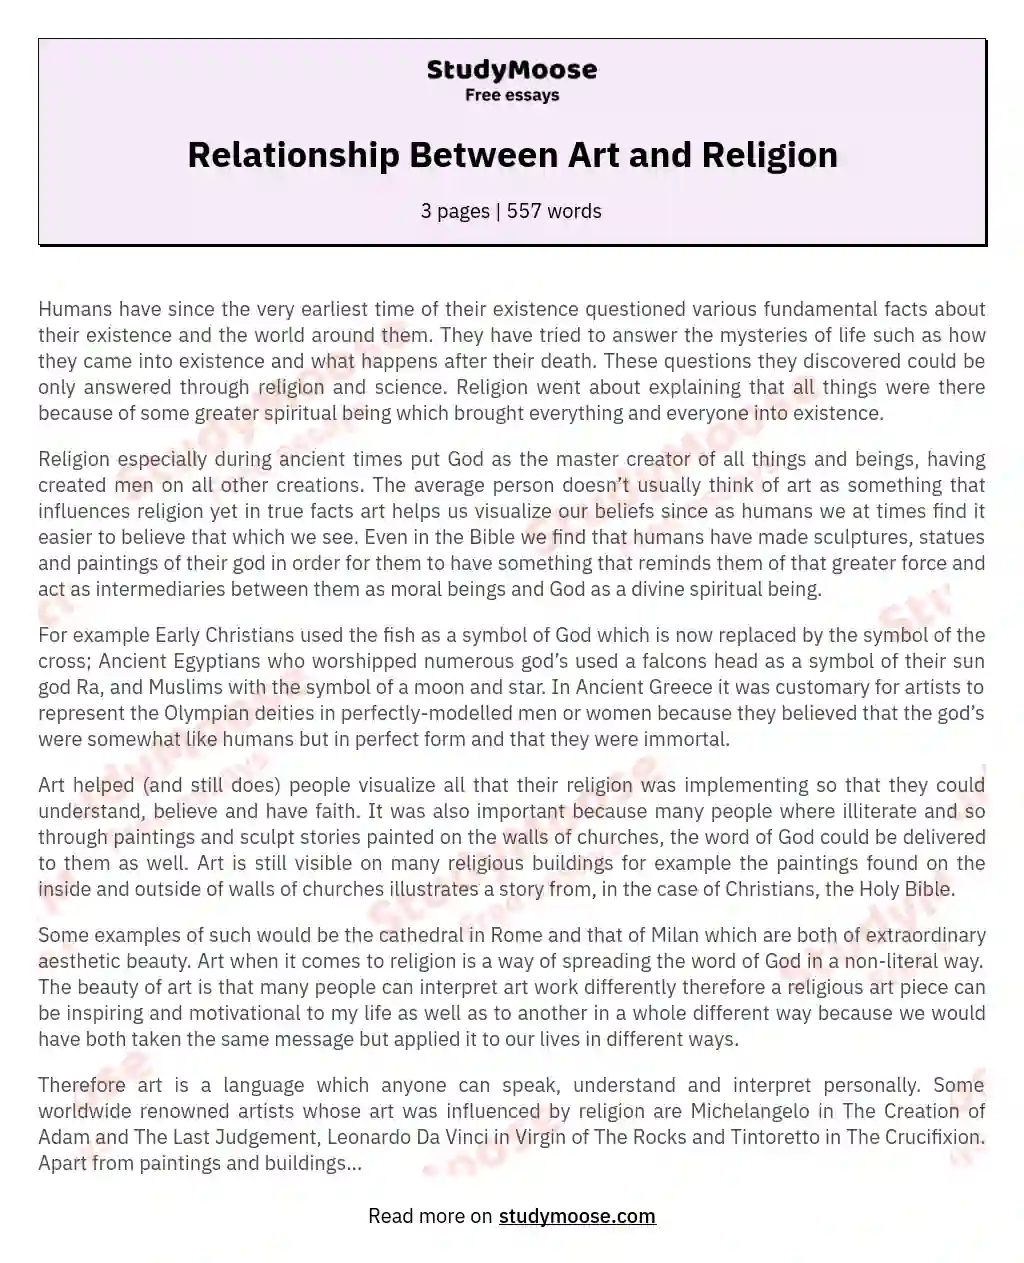 Relationship Between Art and Religion essay